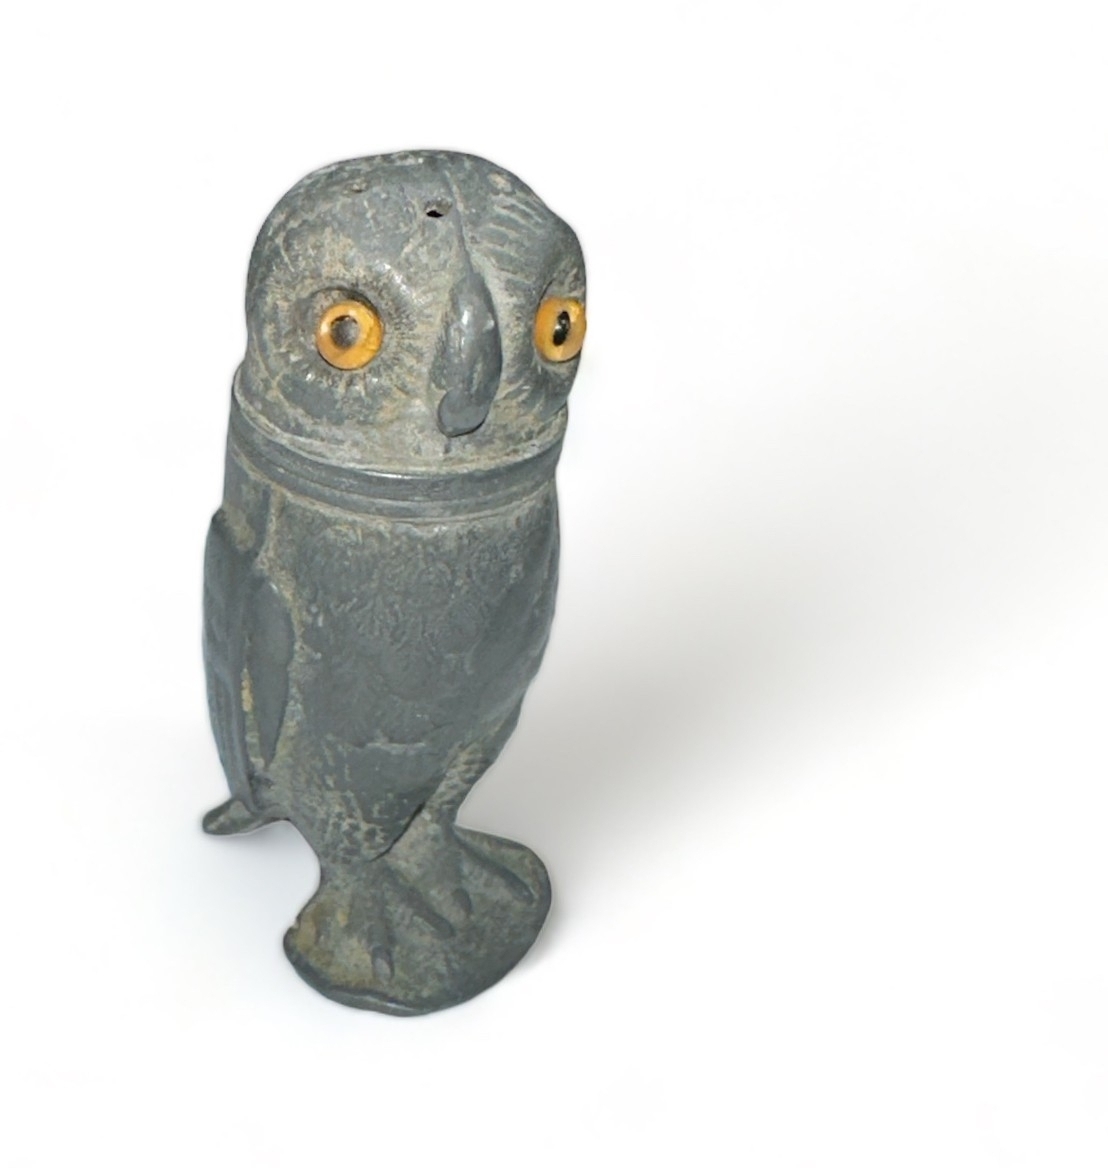 A late 19th / early 20th Century pewter novelty pepperette in the form of an owl, with glass eyes.